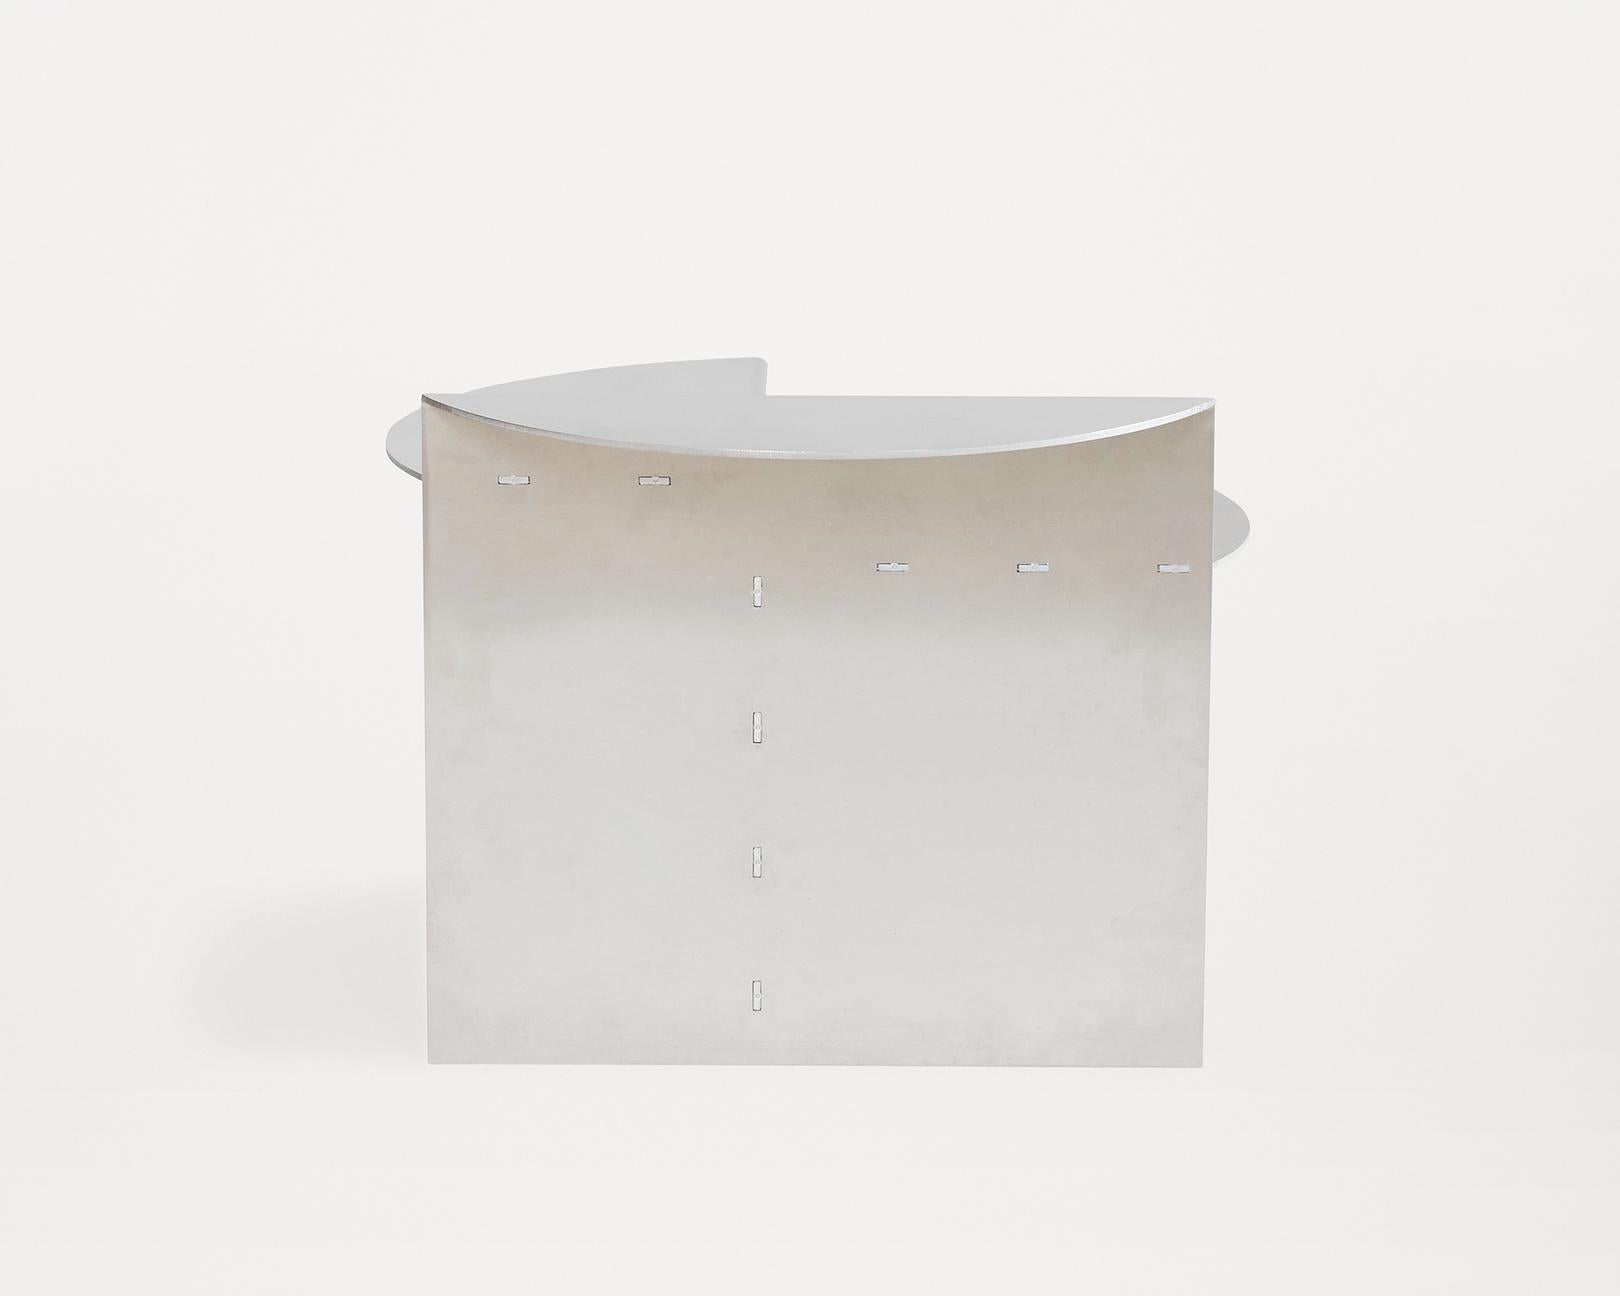 This beautifully crafted piece is made of untreated aluminium and is reminiscent of Donald Judd's design style. Due to the use of
untreated aluminium, patina and signs of wear will become soon noticeable in line with the designer’s intention to